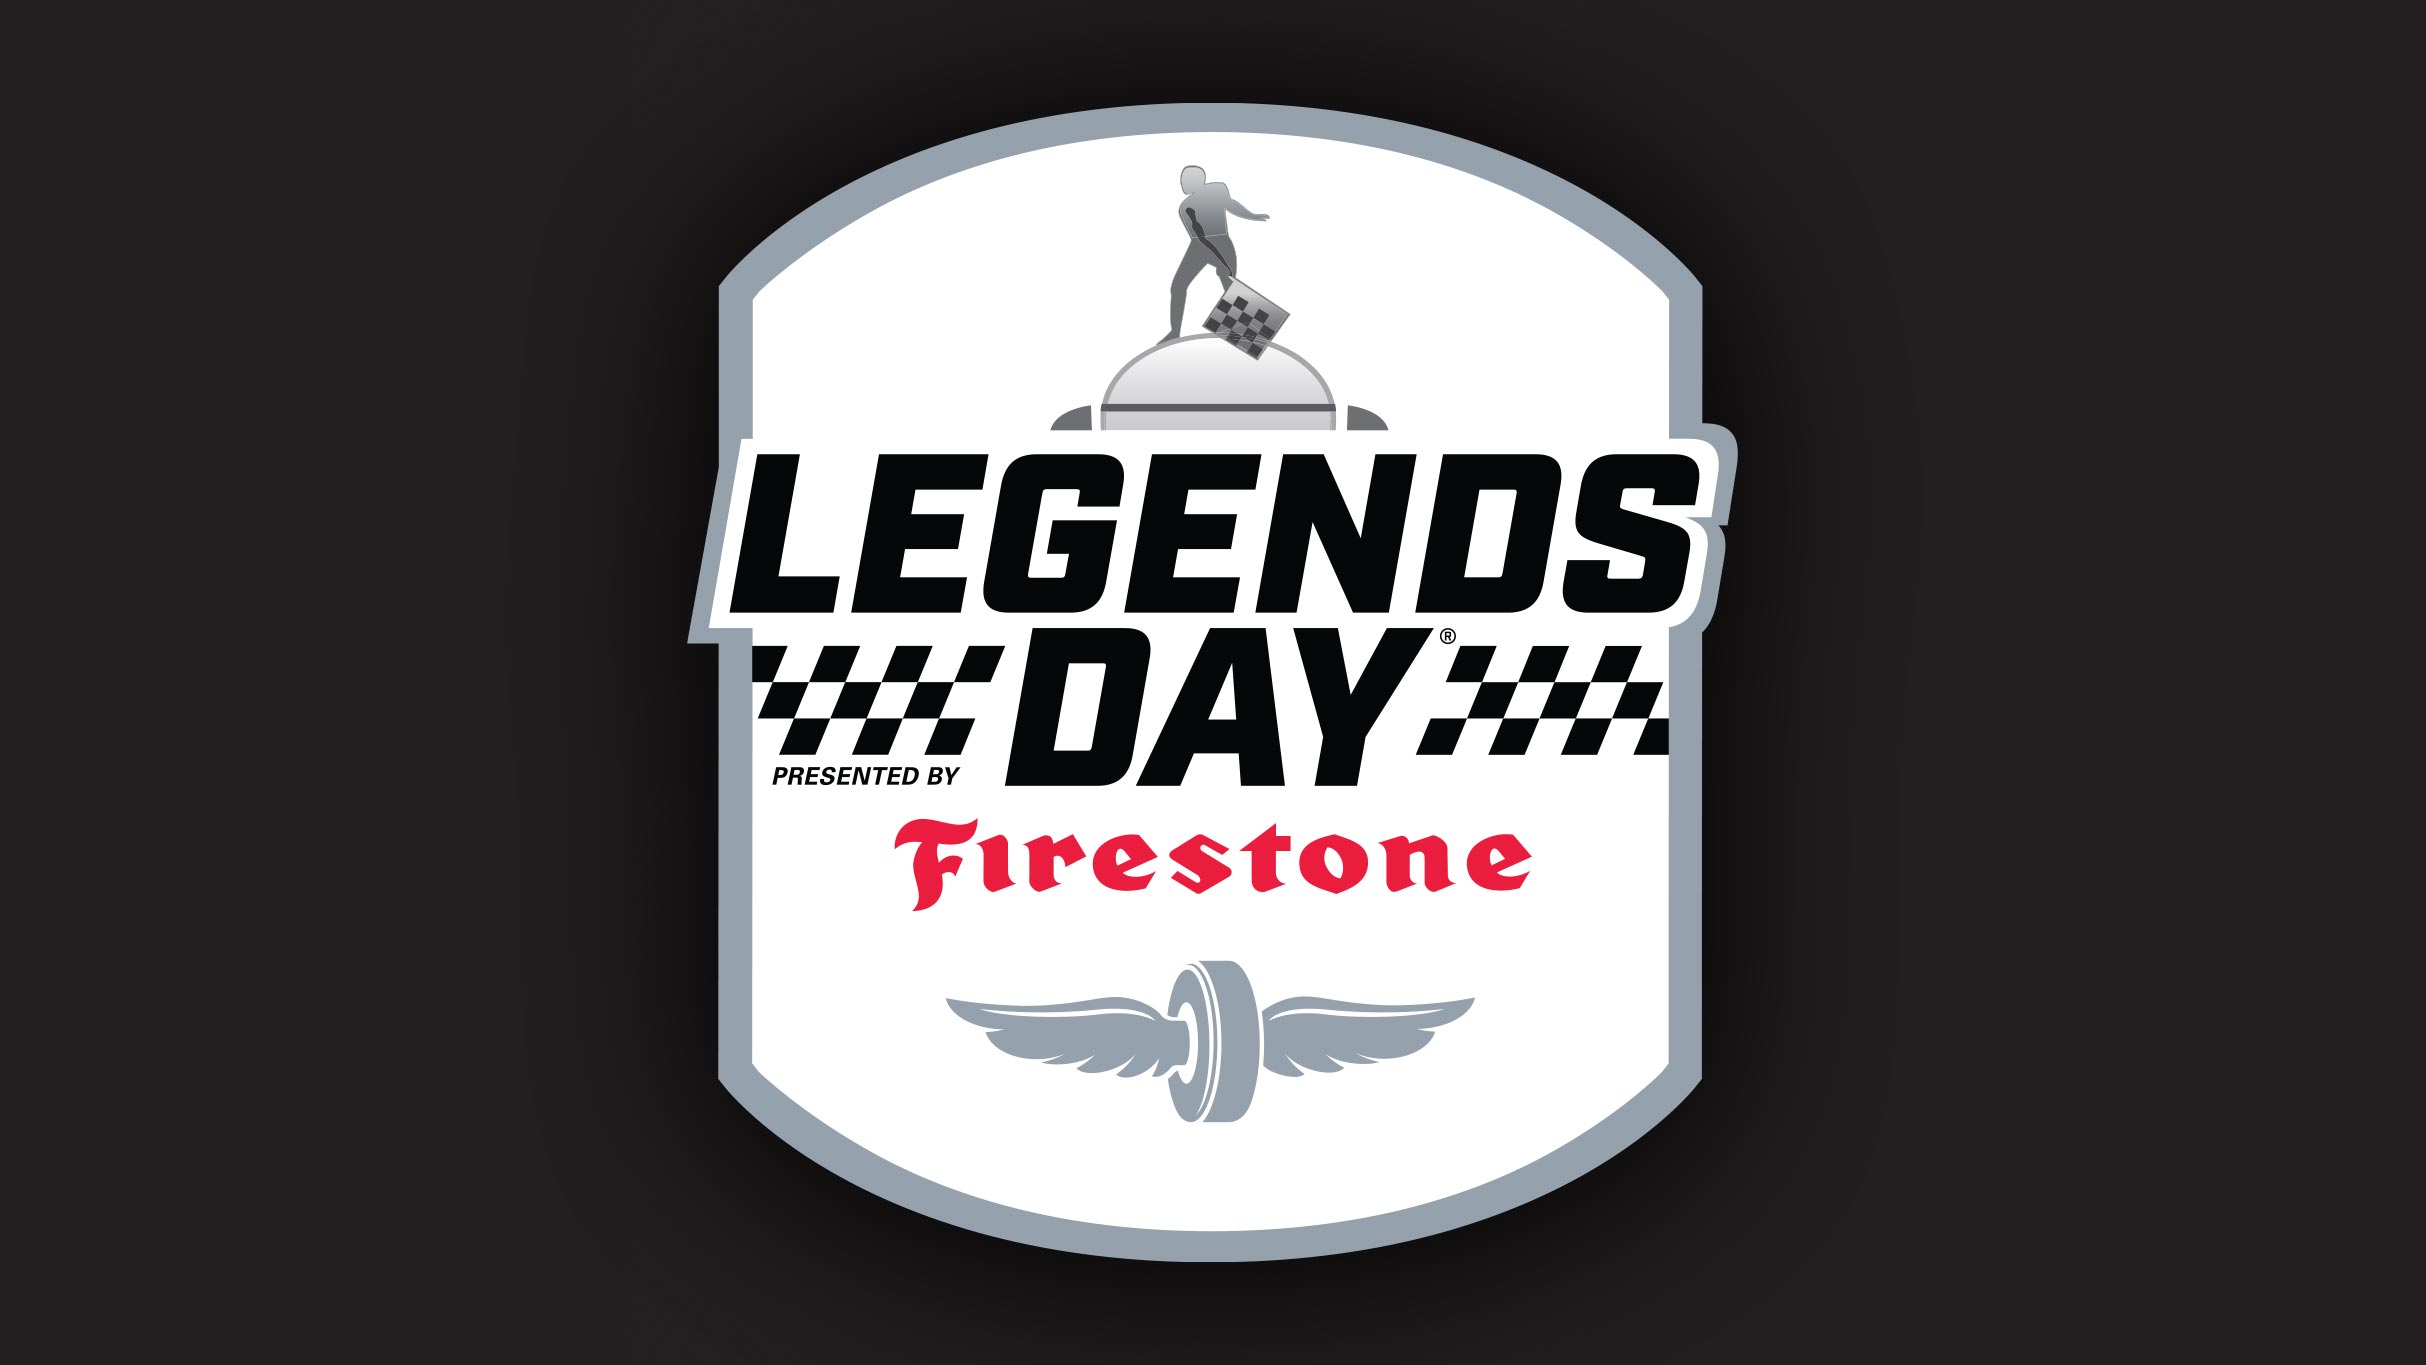 Firestone Legends Day Concert Featuring Brad Paisley in Indianapolis promo photo for Official Platinum presale offer code